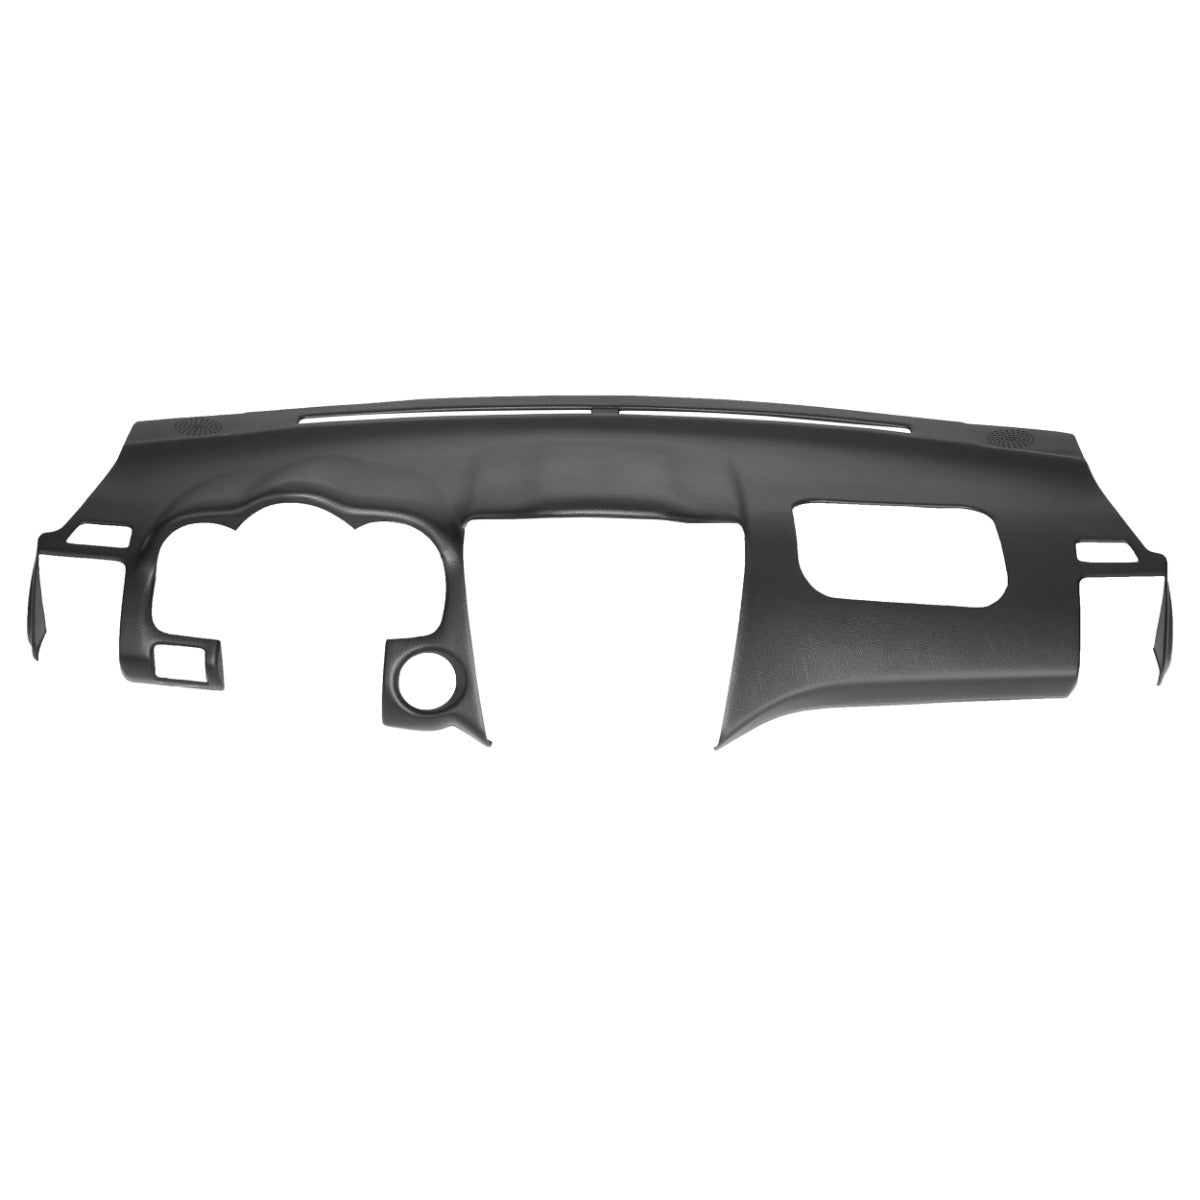 Dashskin Molded Dash Cover Compatible with Lexus RX330 RX350 RX400h in Black (USA Made) w/Center Speaker Holes